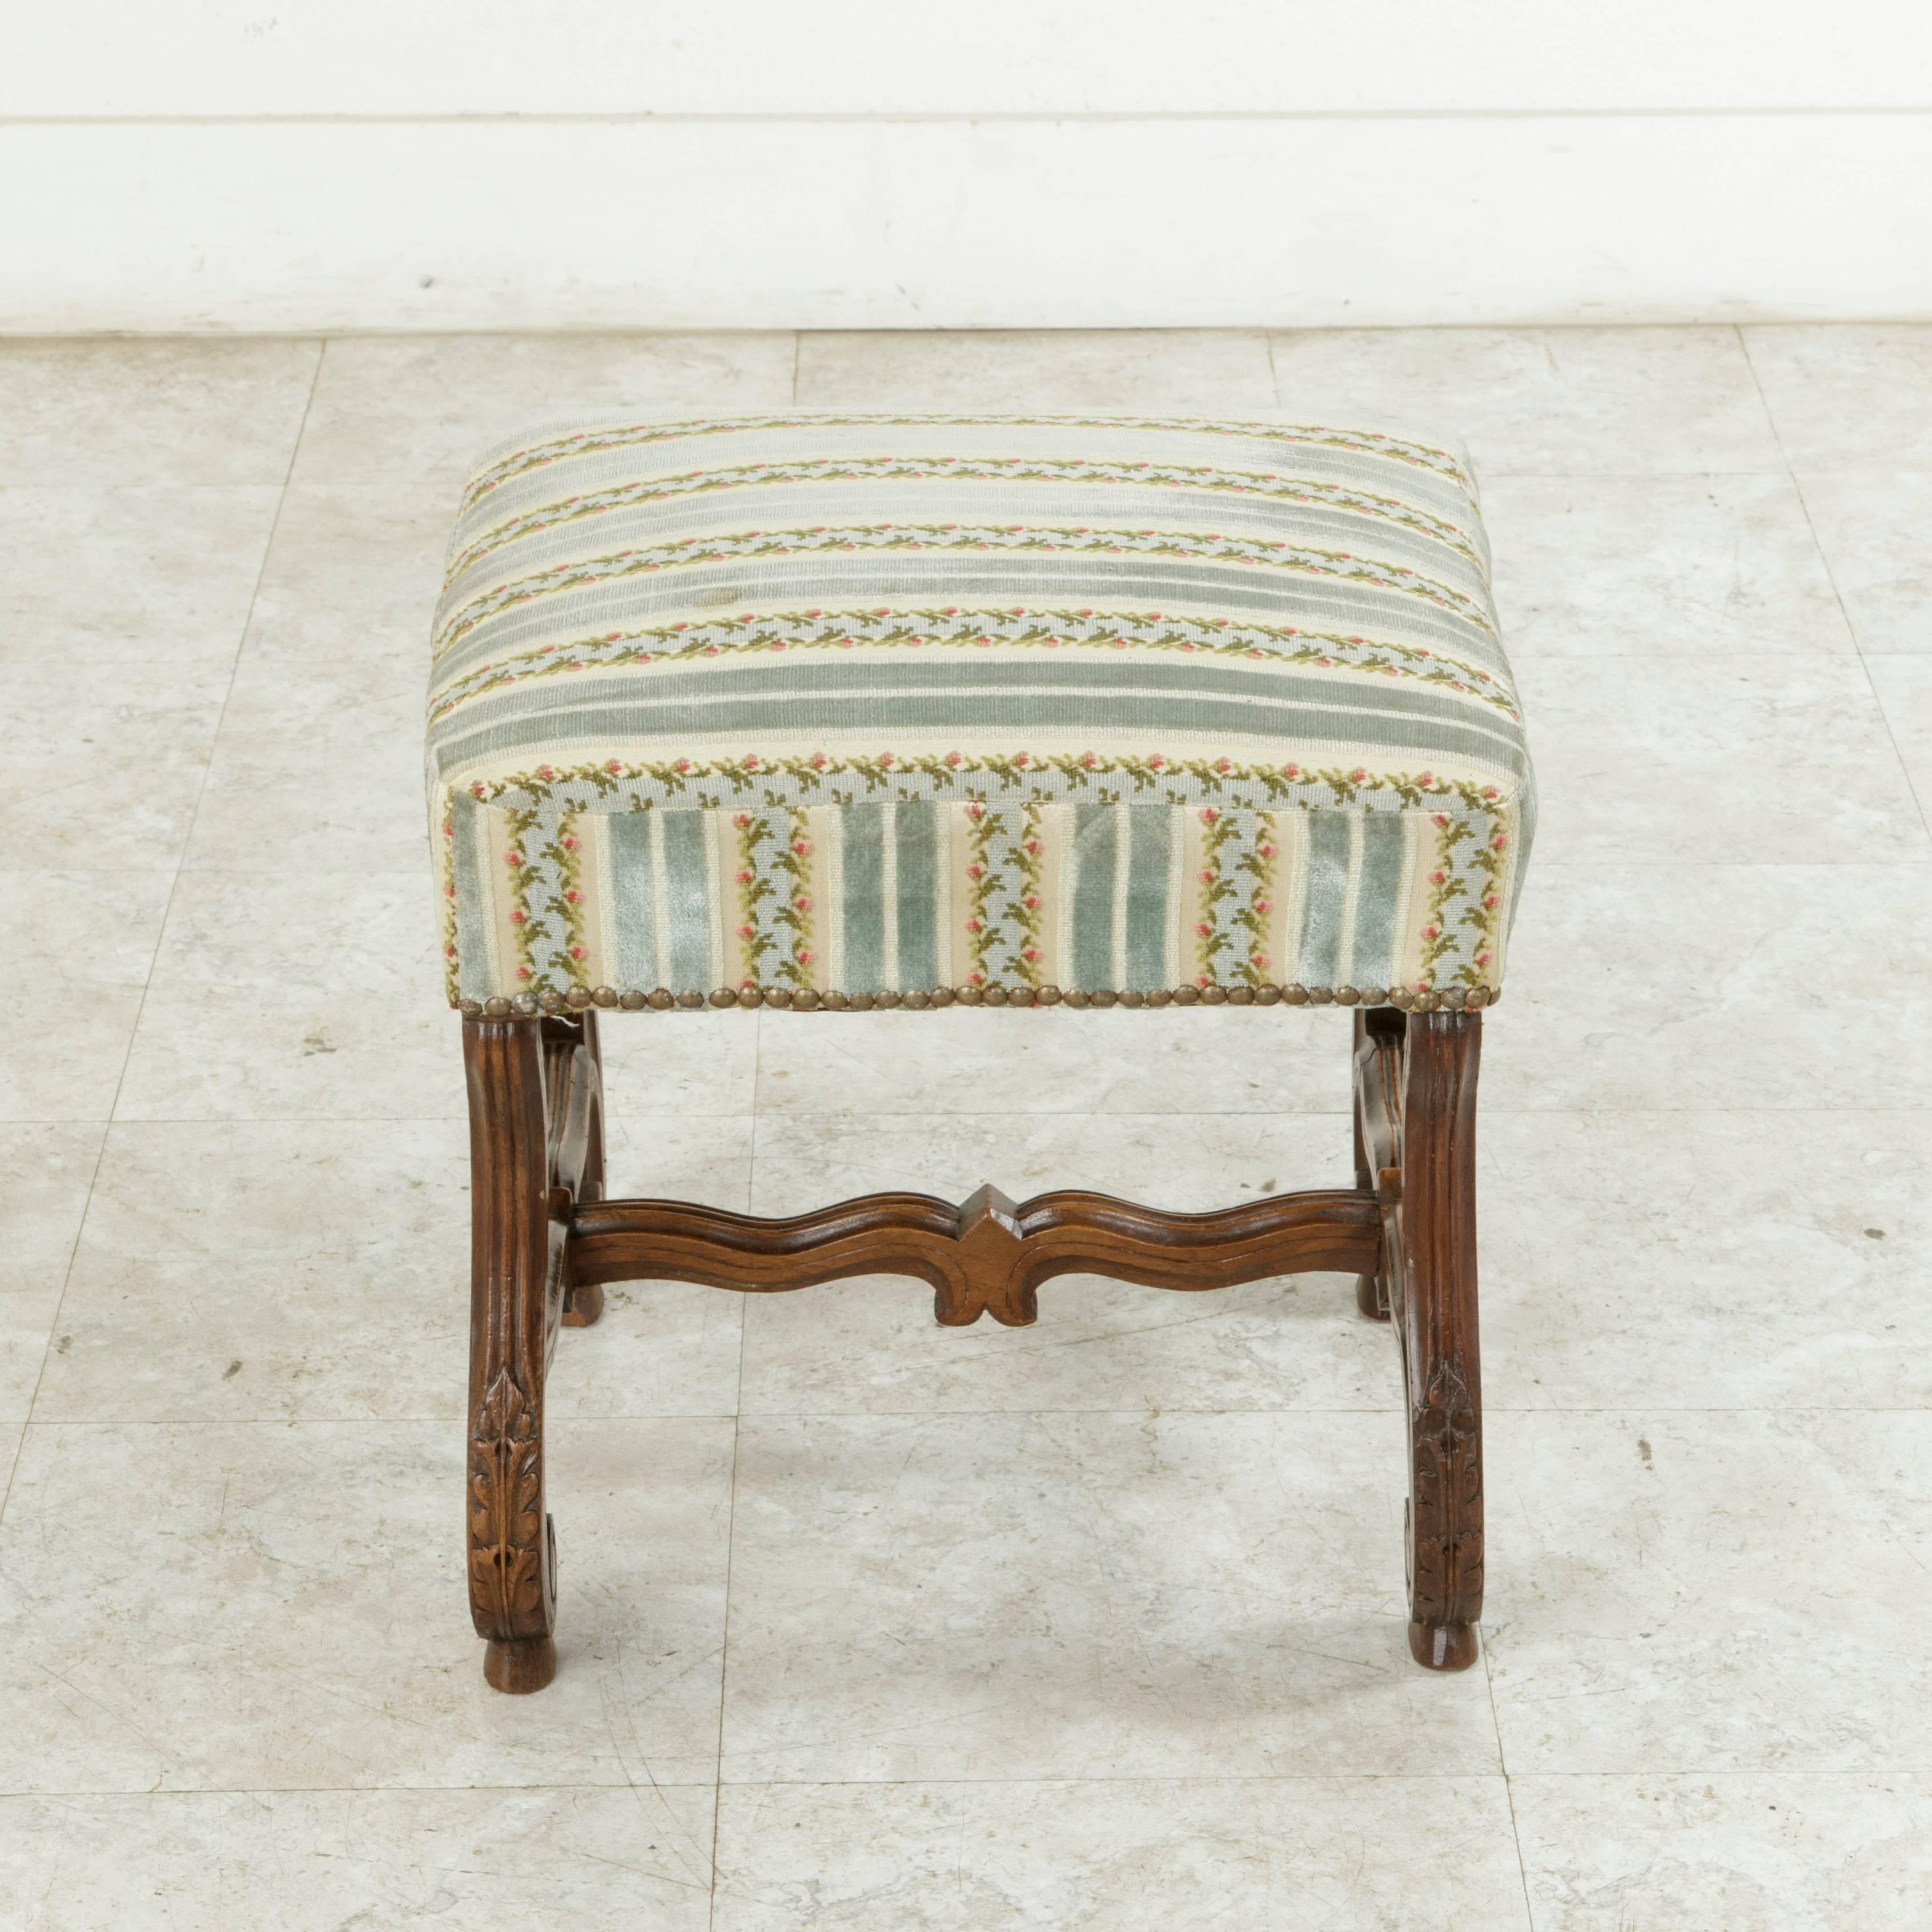 This late 19th century French Louis XIV style banquette or vanity bench features fluted and scrolled mutton legs detailed with hand-carved acanthus leaves. A curved H stretcher joins the legs and provides stability to the stool. Upholstered with